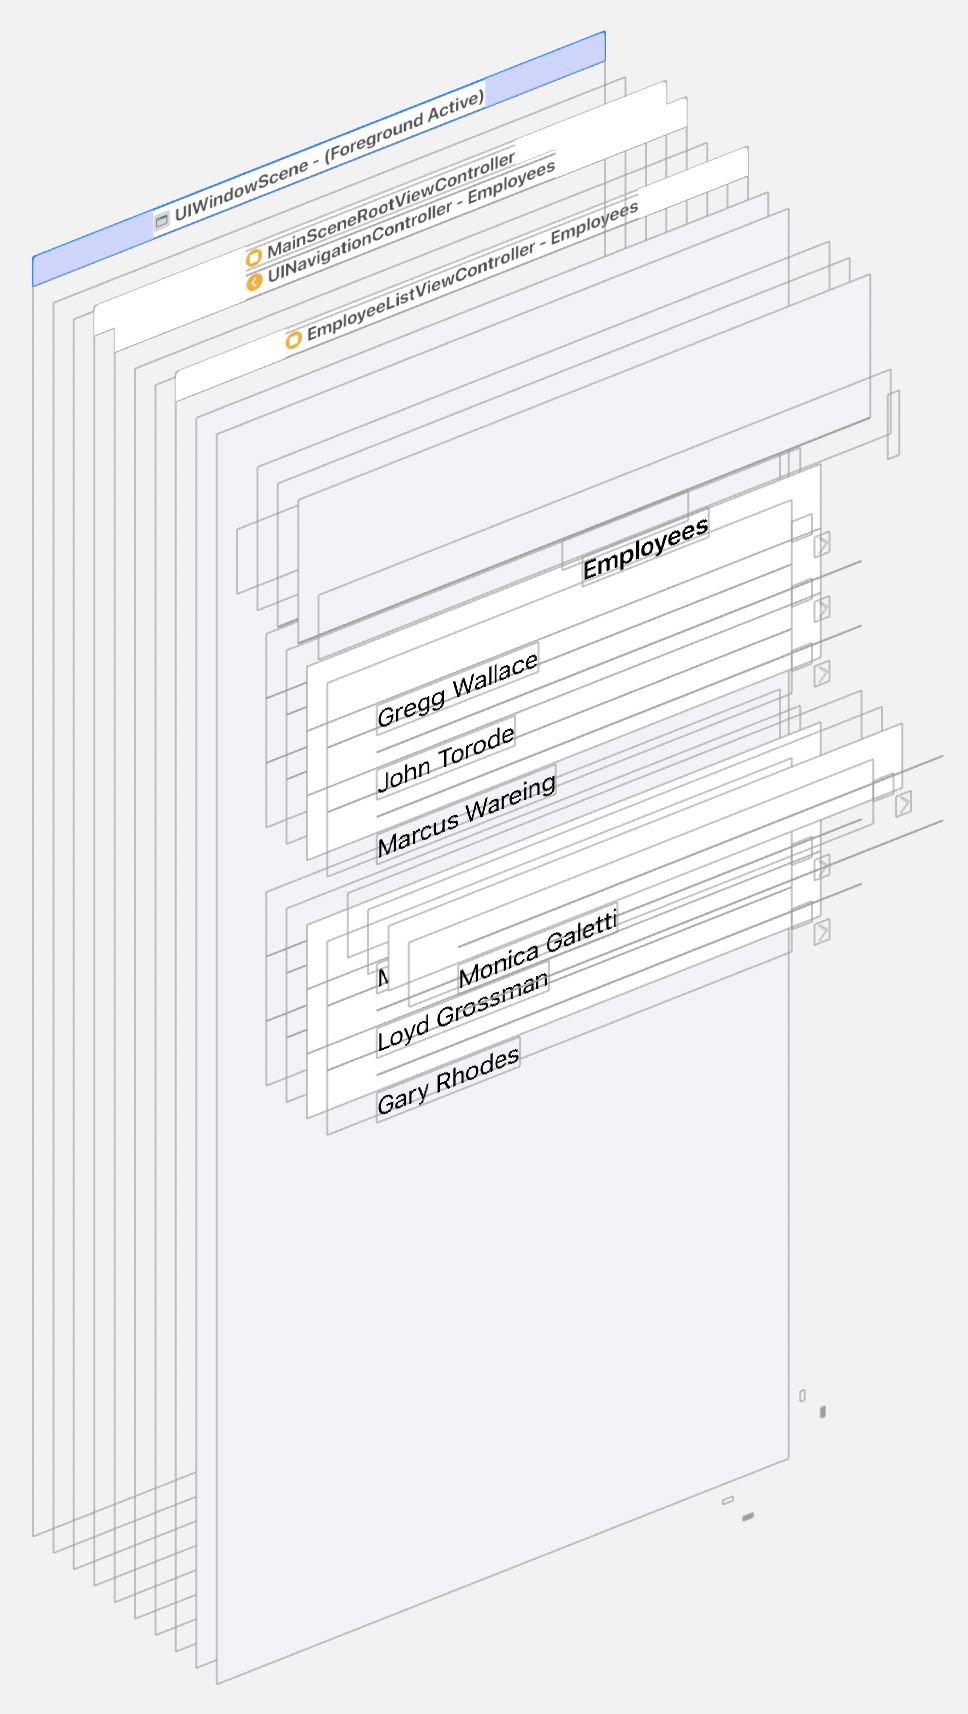 Our application's view controller heirarchy, as displayed by Xcode's view debugger.